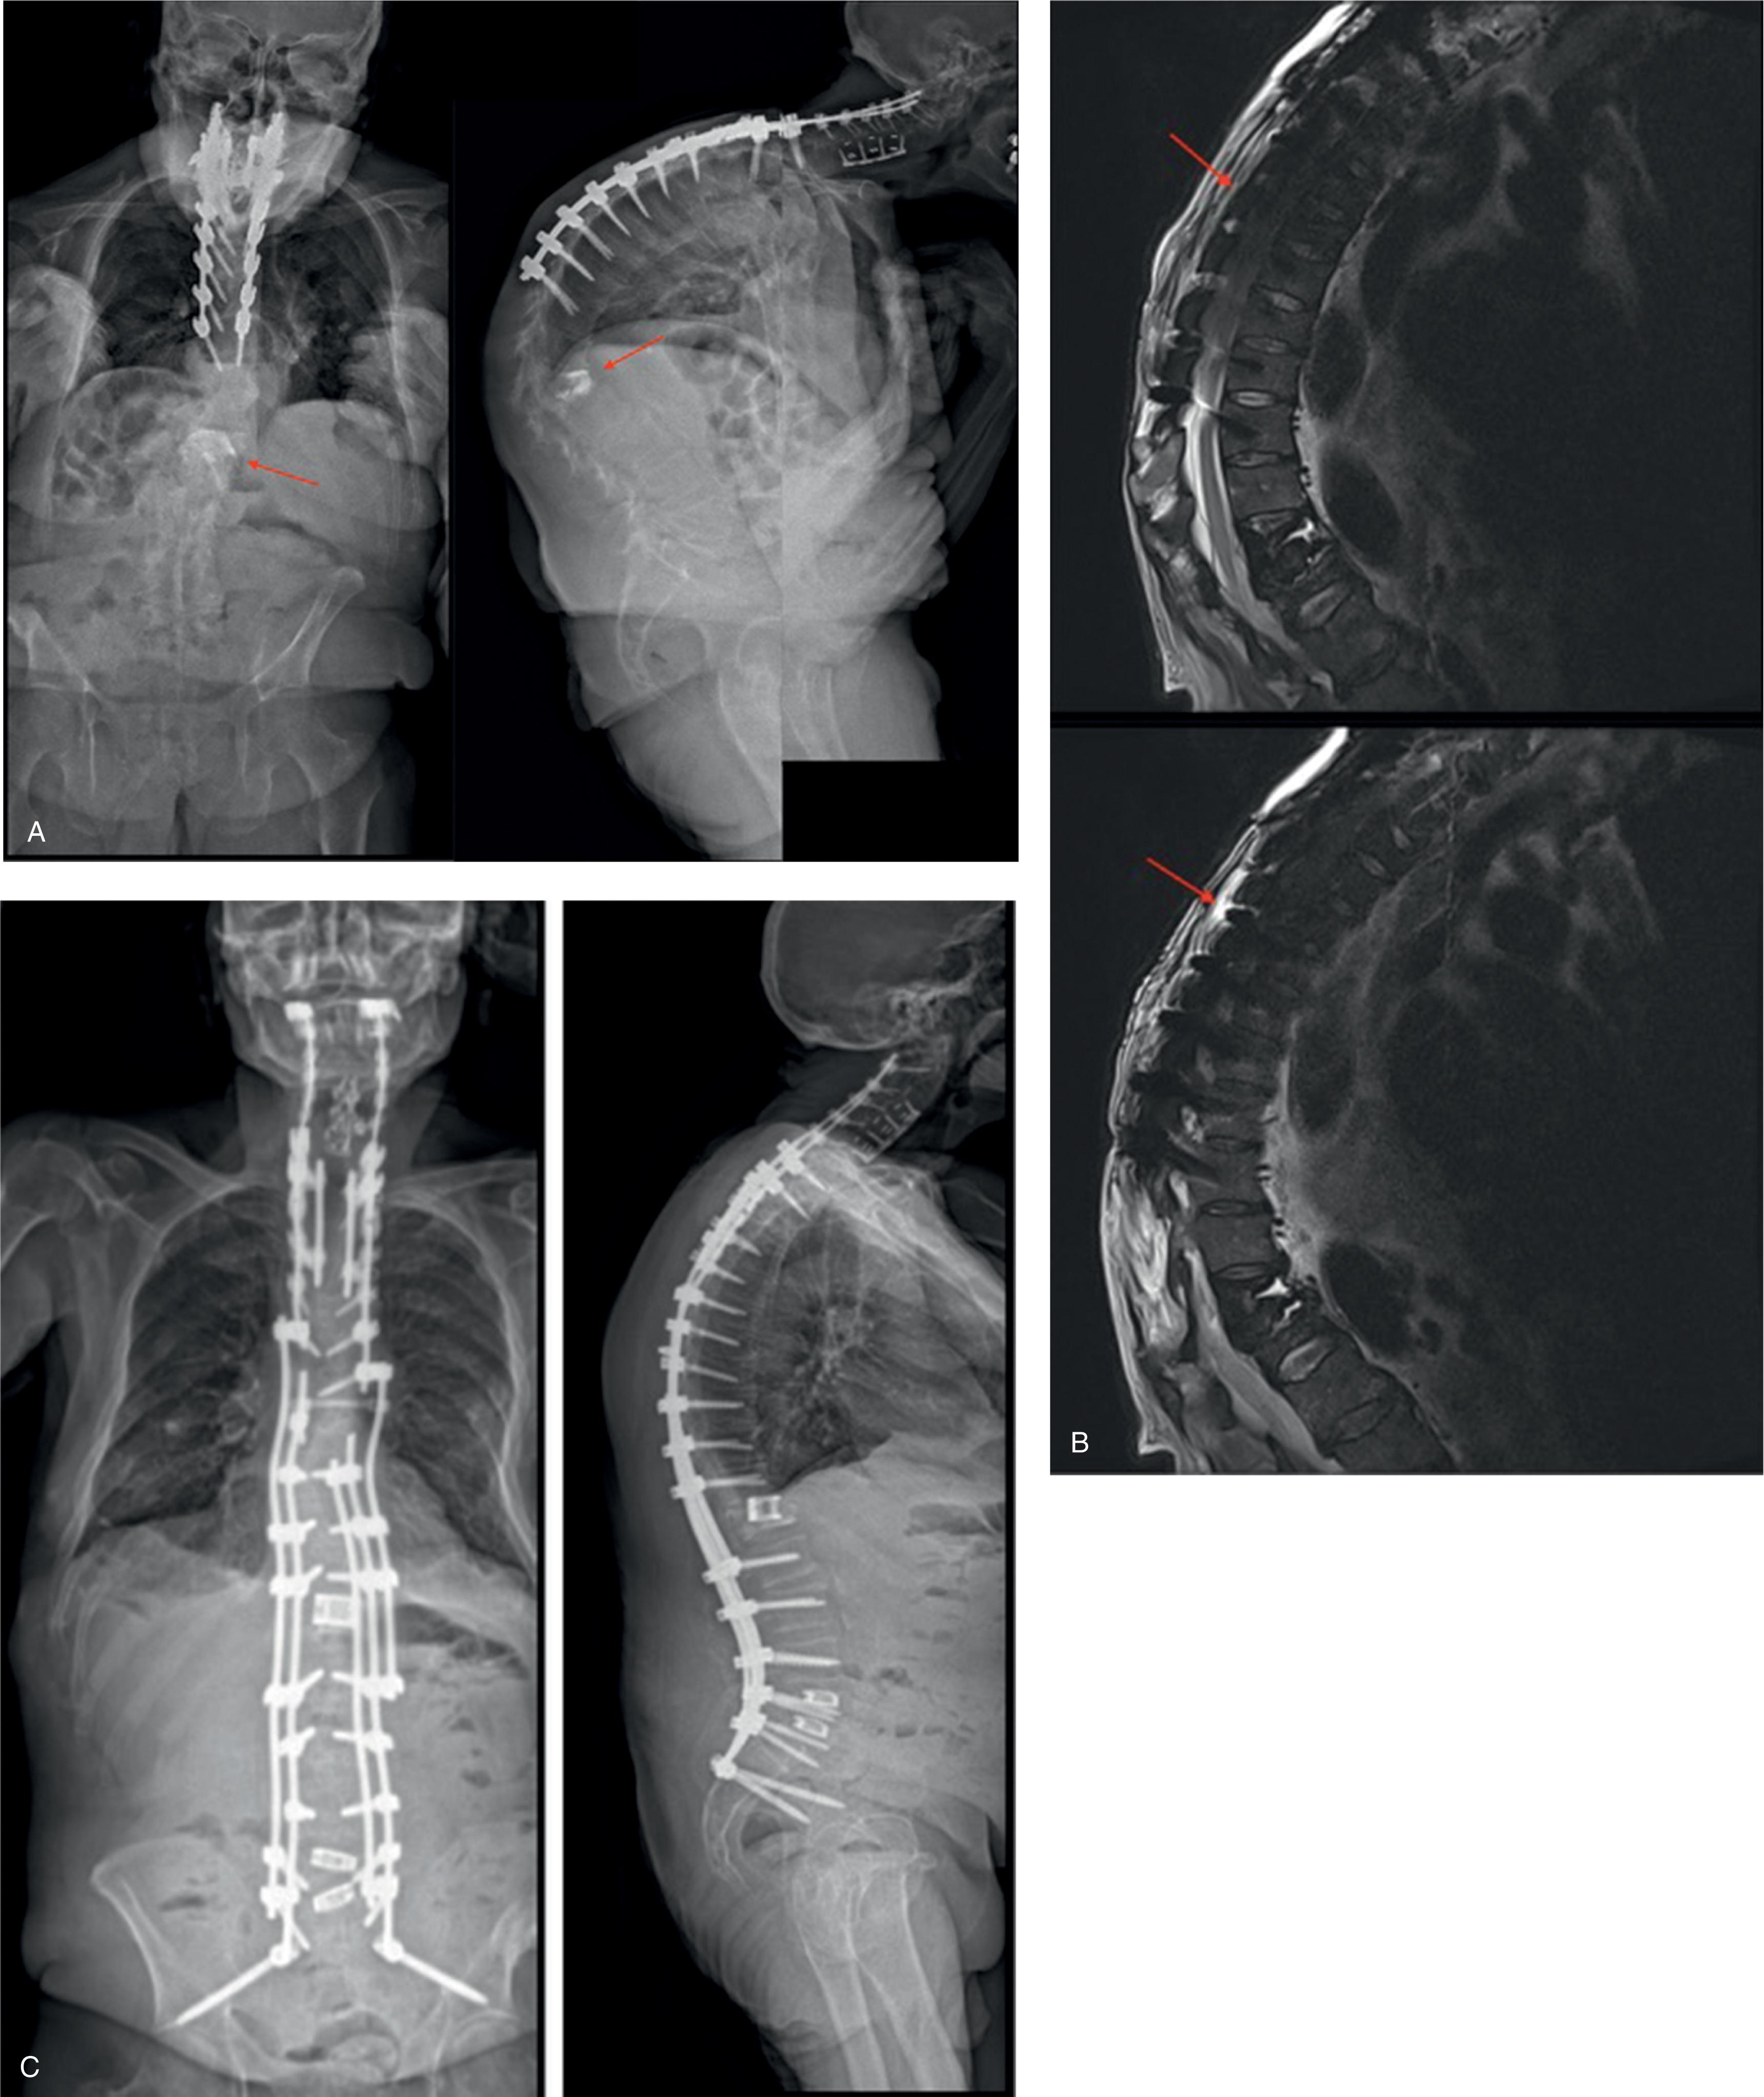 Fig. 19.1, (A) Standing anteroposterior (AP) and lateral radiographs of AF, a female patient with T12 and L1 vertebral collapse resulting in severe kyphosis (148 degrees) and sagittal imbalance. (B) Magnetic resonance image with gadolinium enhancement of the patient, AF, demonstrating some stenosis of the spinal cord but no gross neural impingement. (C) Following revision posterior spinal fusion with vertebral column resection of T12 and L1 and a transforaminal lumbar interbody fusion from L4 to sacrum, AF’s kyphosis was corrected to 58 degrees, with some improvement in coronal alignment as well. (D) Full-length AP and lateral standing films comparing preoperative and postoperative deformity of AF.